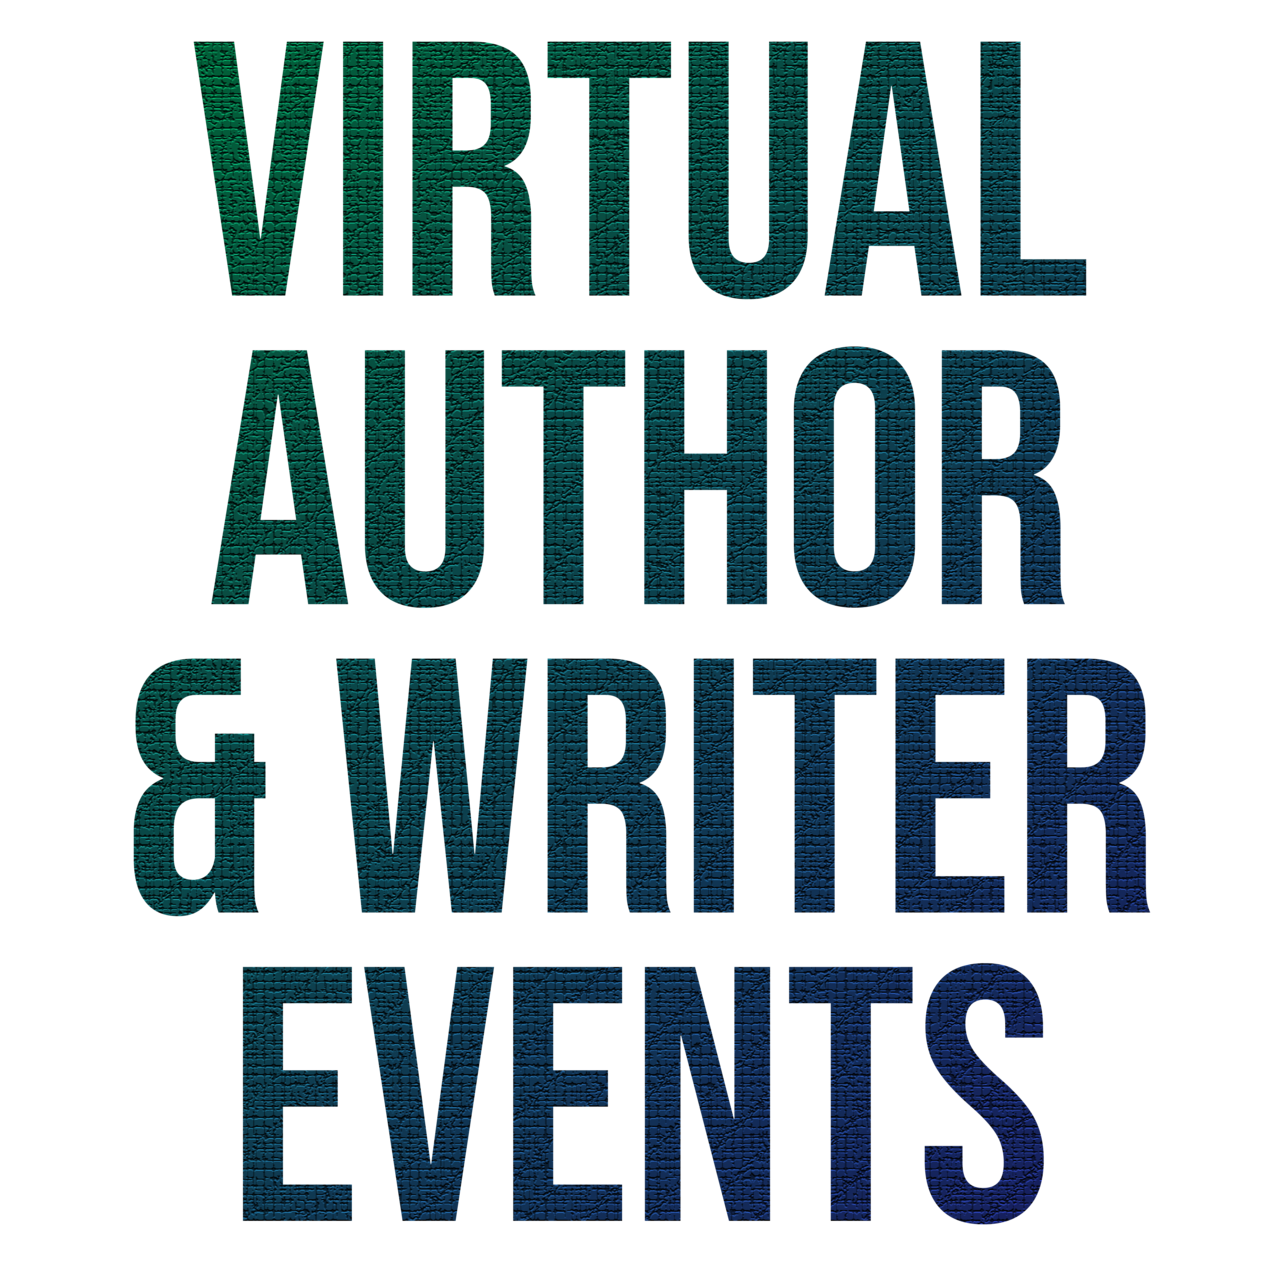 Virtual Author & Writer Events